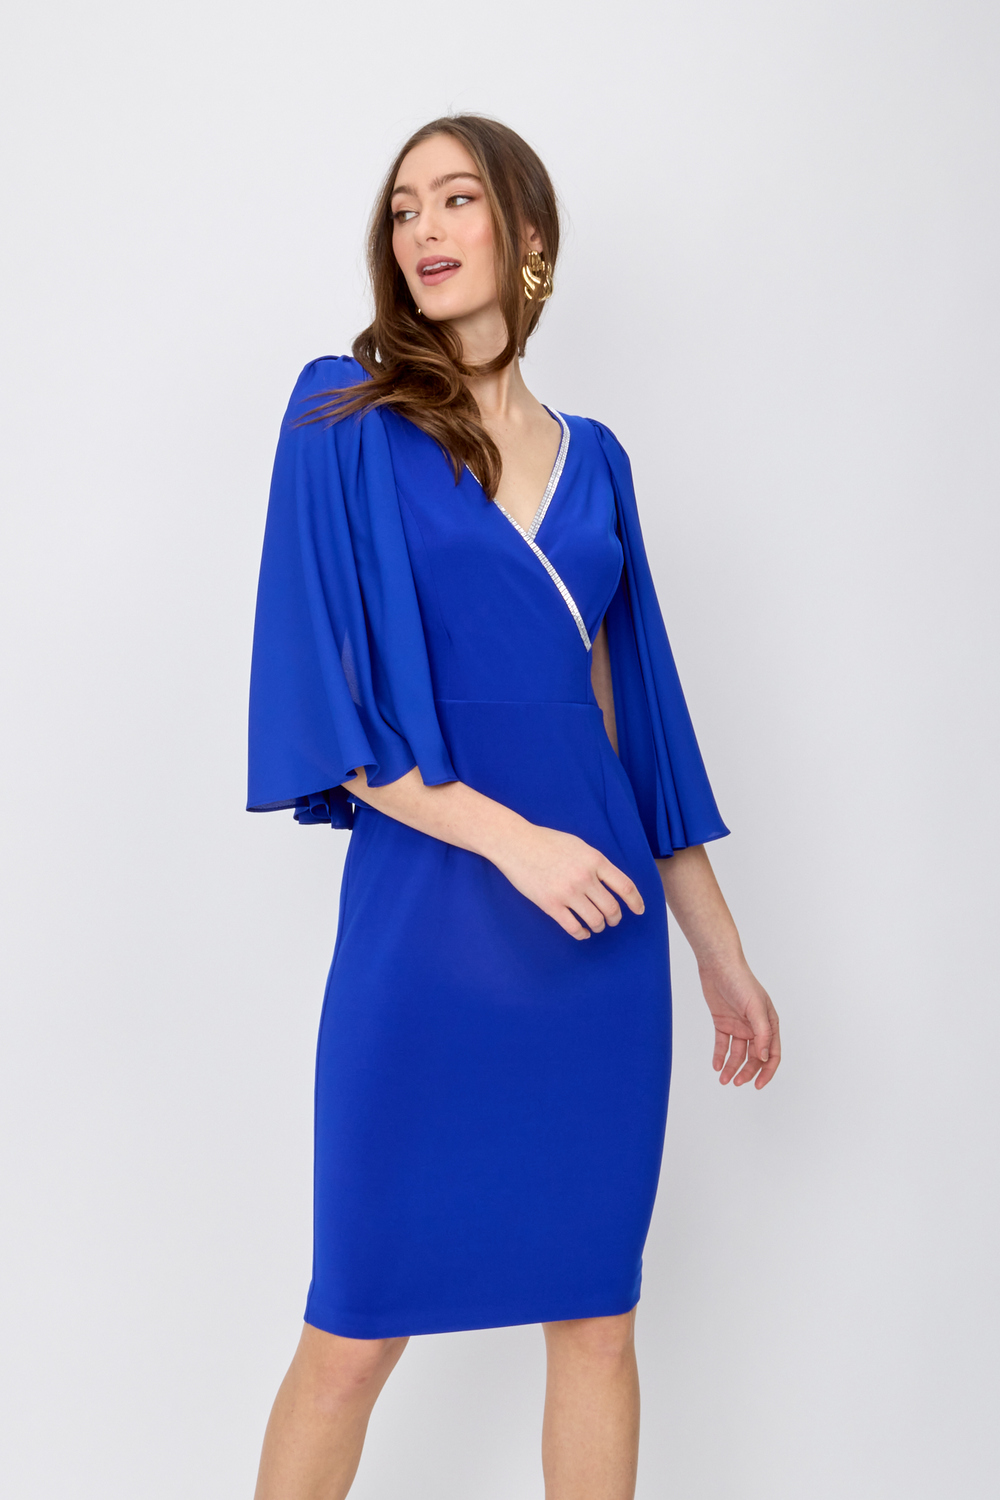 Embellished Wrap Front Dress Style 242732. Royal Sapphire 163